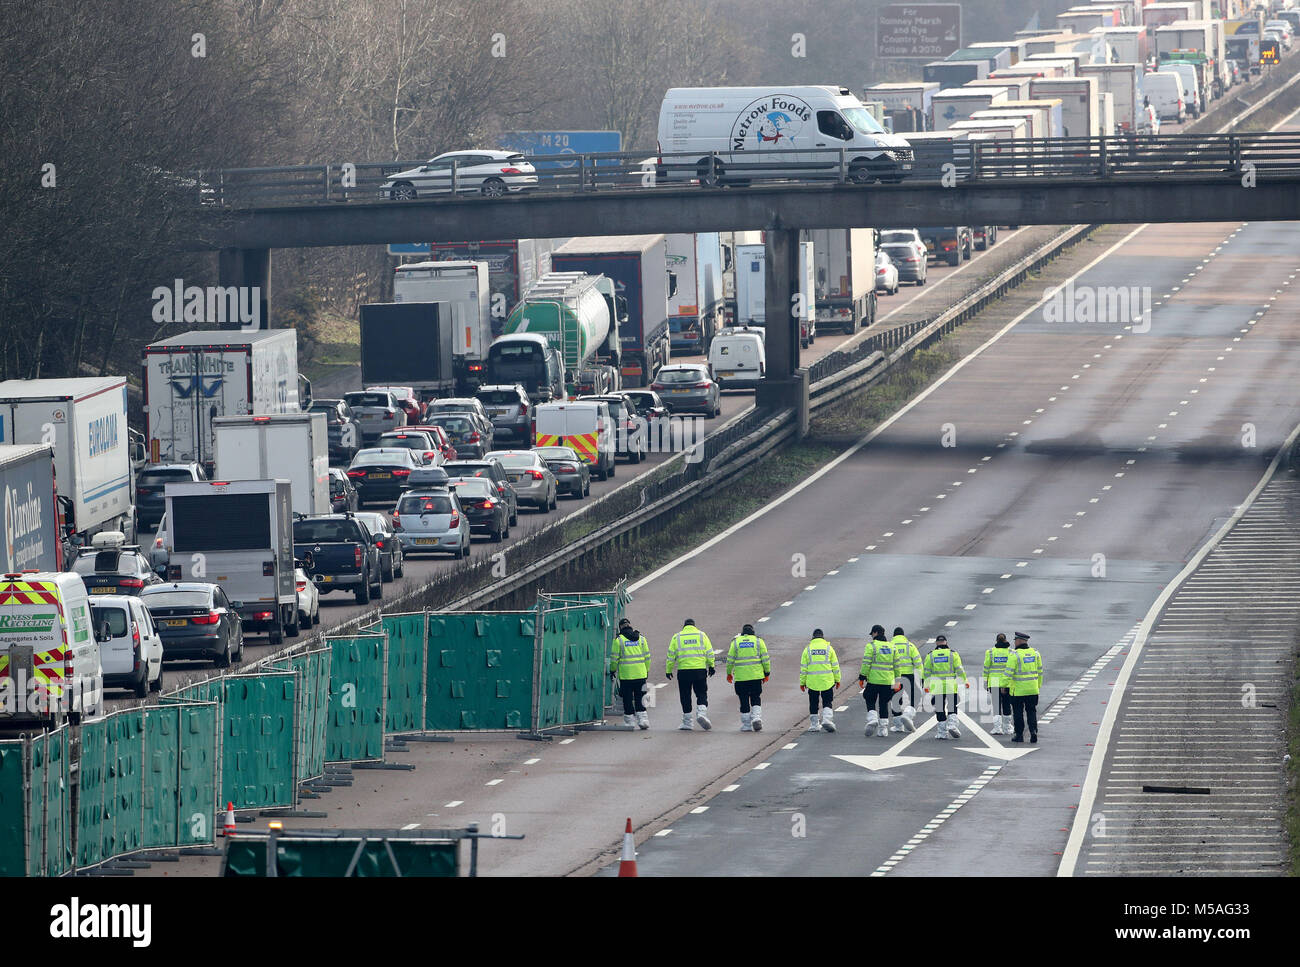 Police officers at work on the M20 near Ashford in Kent which has been closed to traffic after a body was found on the road yesterday evening. Stock Photo